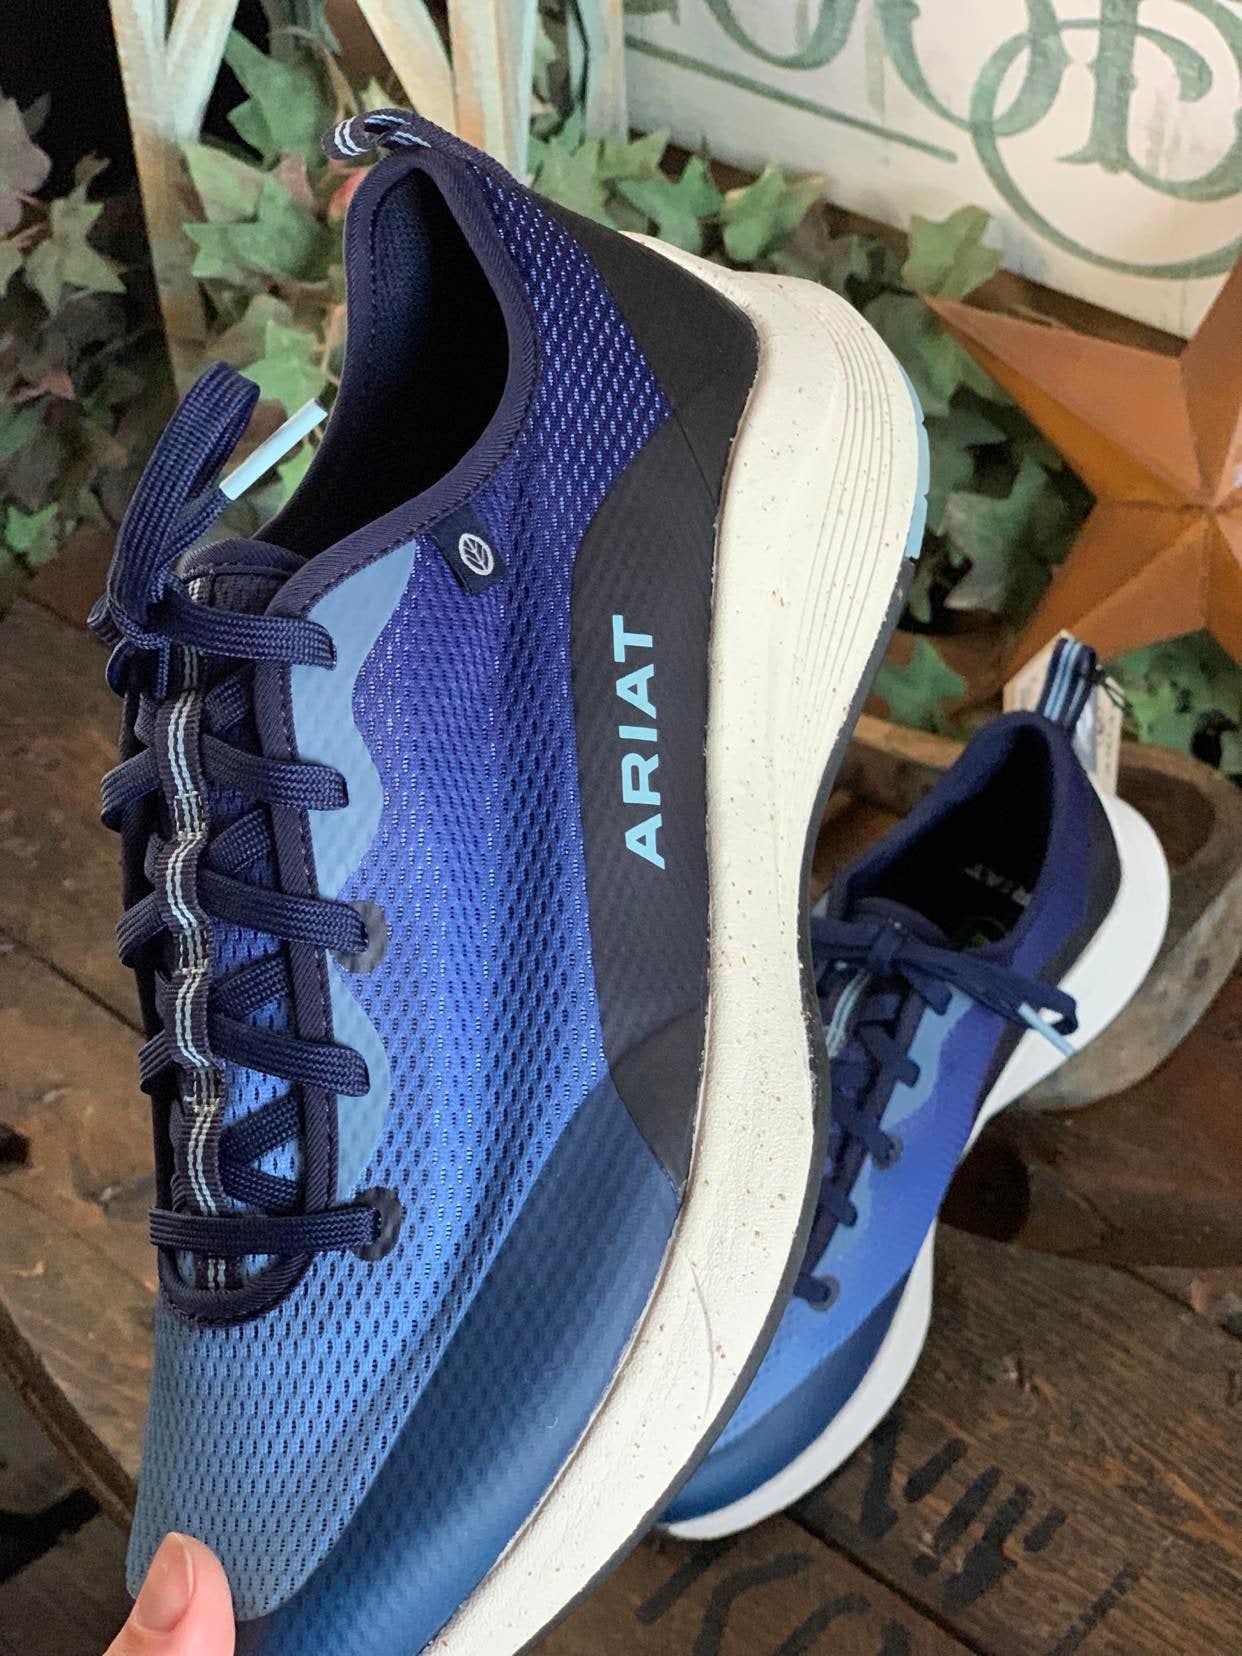 Womens Ariat Shift Runner Tennis Shoes in BlueWaves *FINAL SALE*-Women's Casual Shoes-Ariat-Lucky J Boots & More, Women's, Men's, & Kids Western Store Located in Carthage, MO